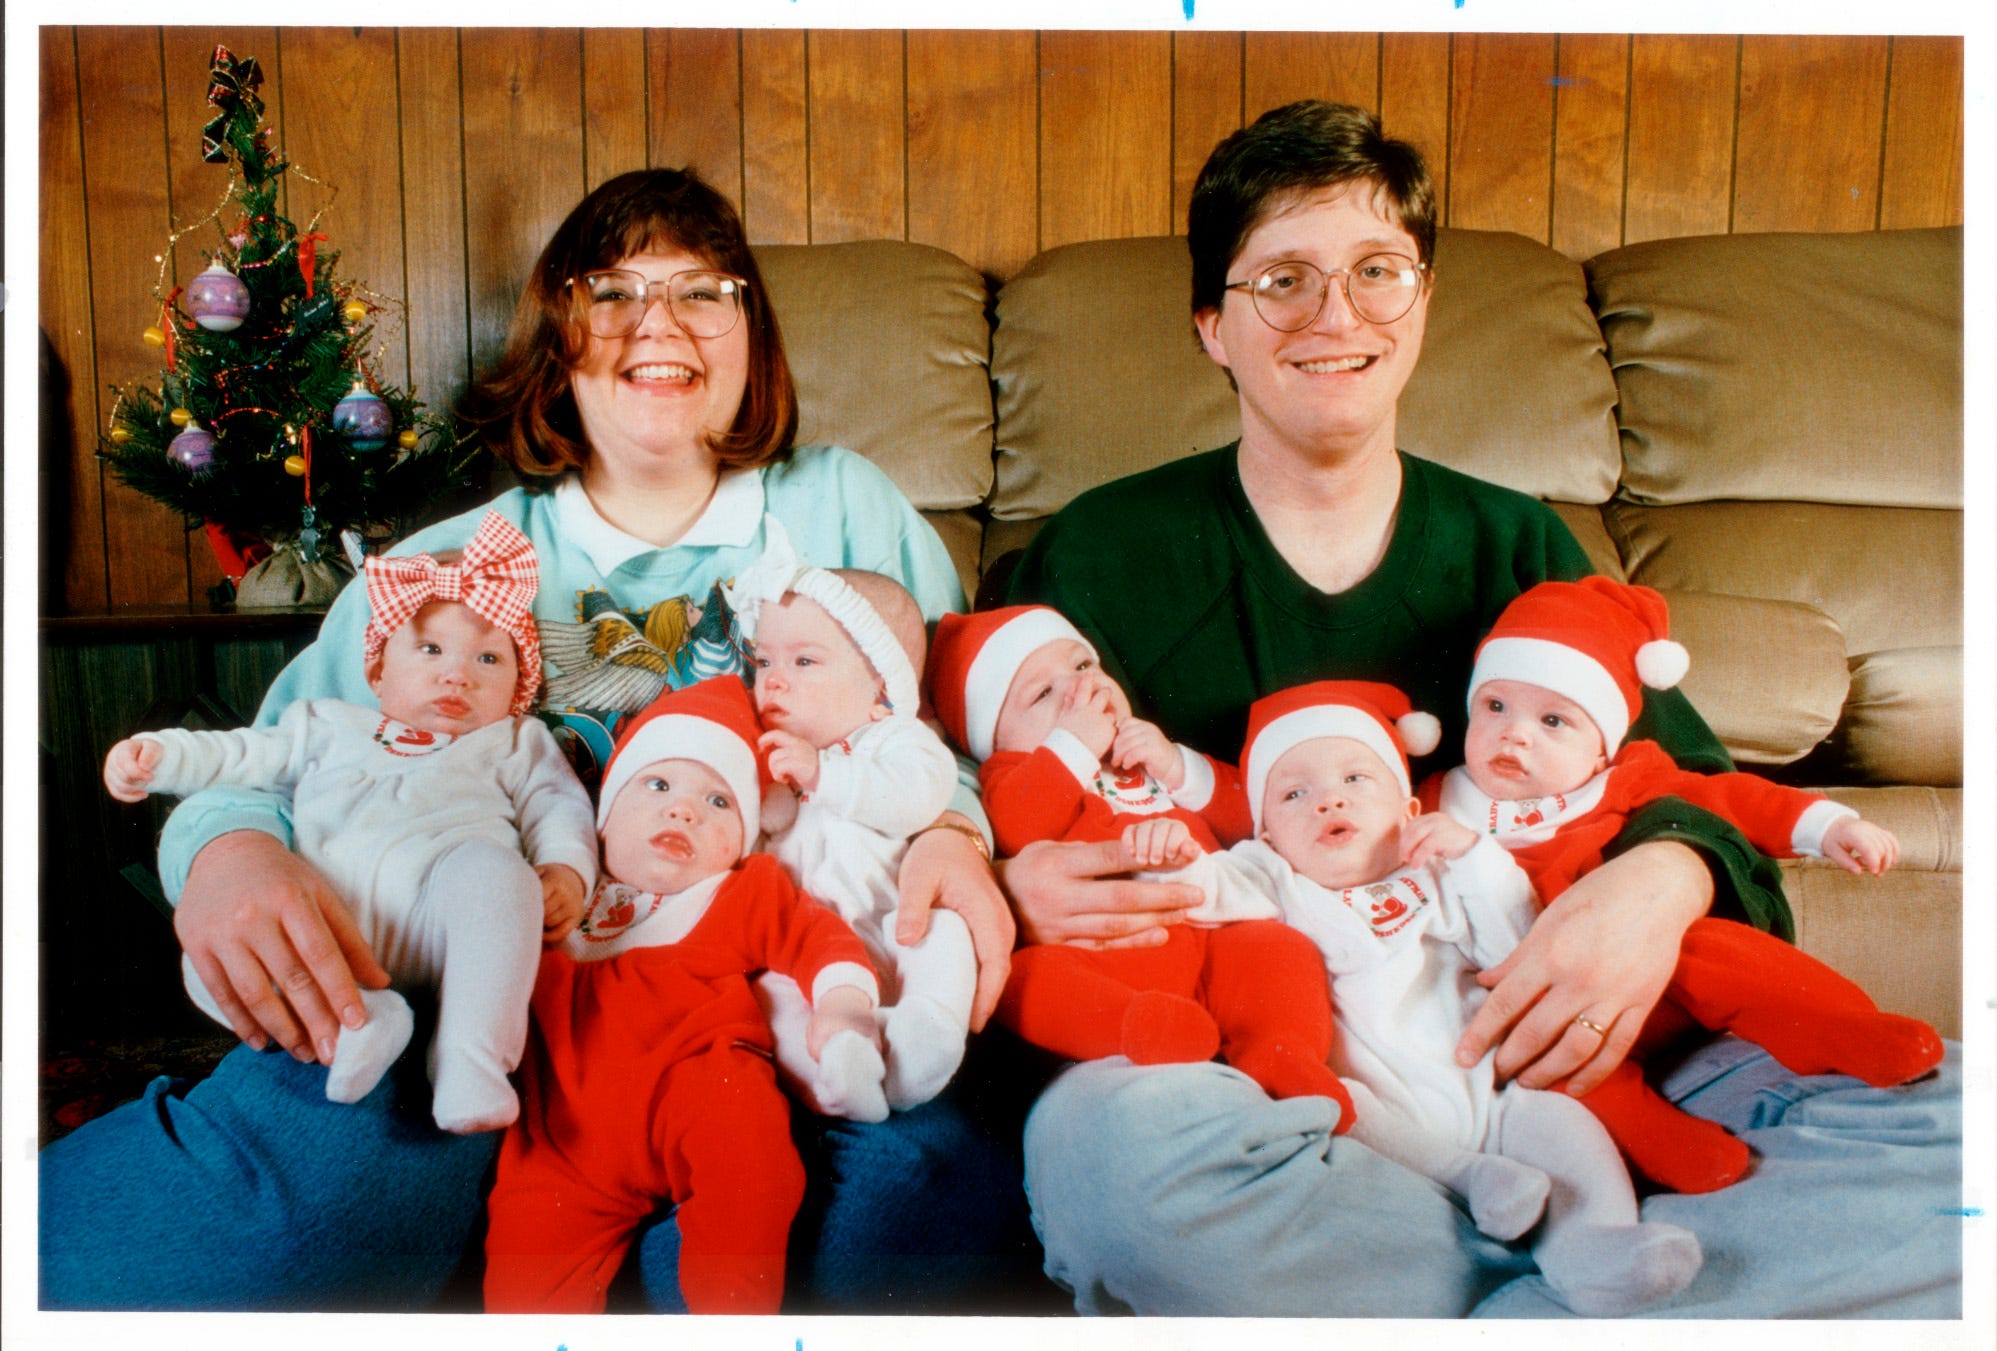 RetroIndy: The Dilley Sextuplets